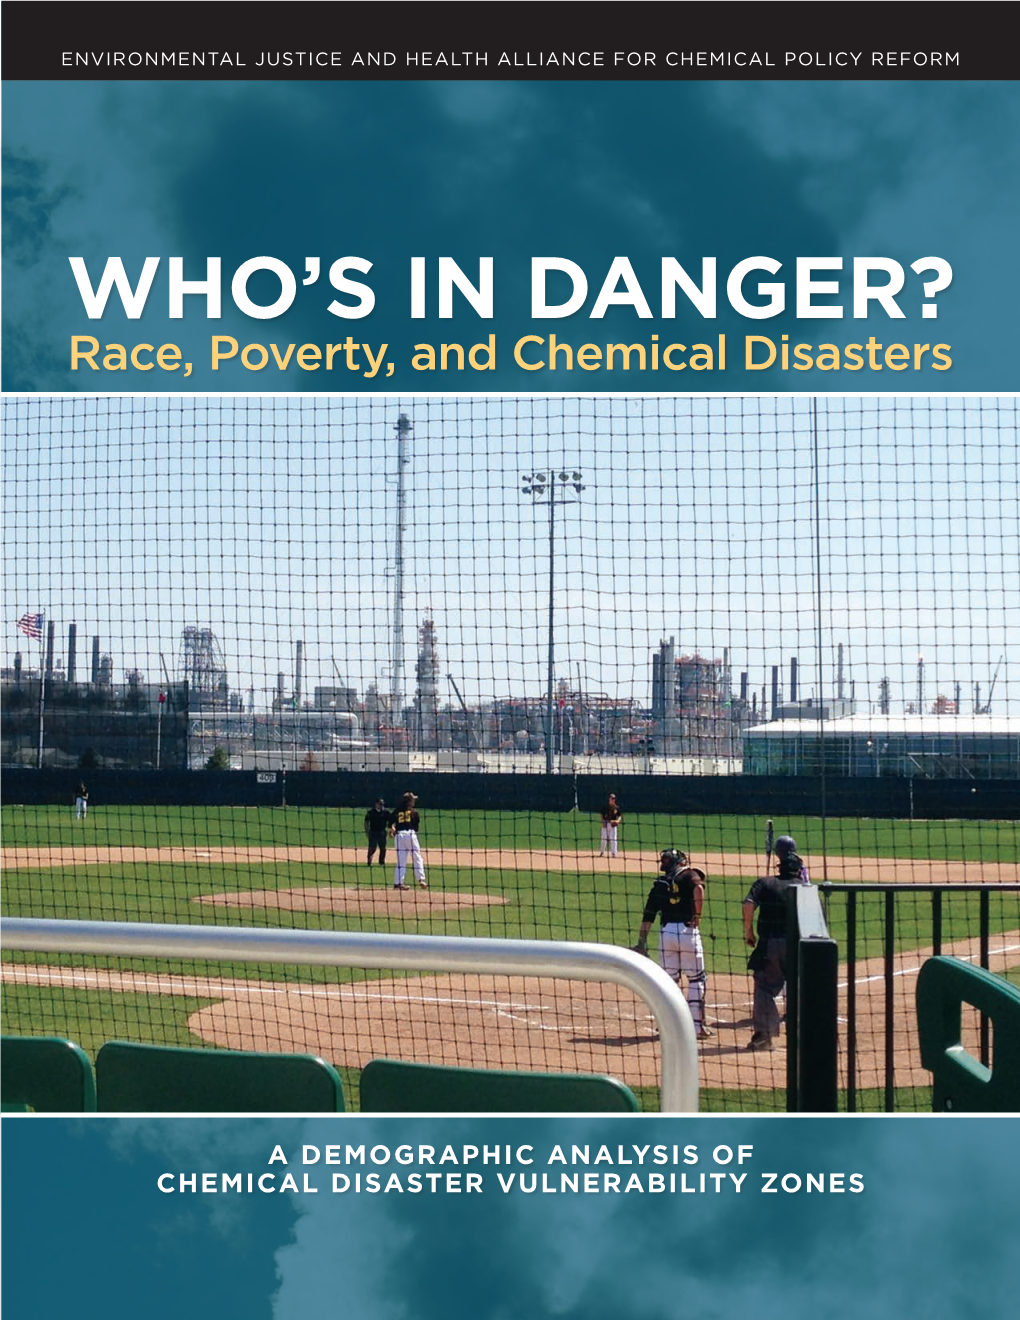 Who's in Danger? Race, Poverty and Chemical Disaster